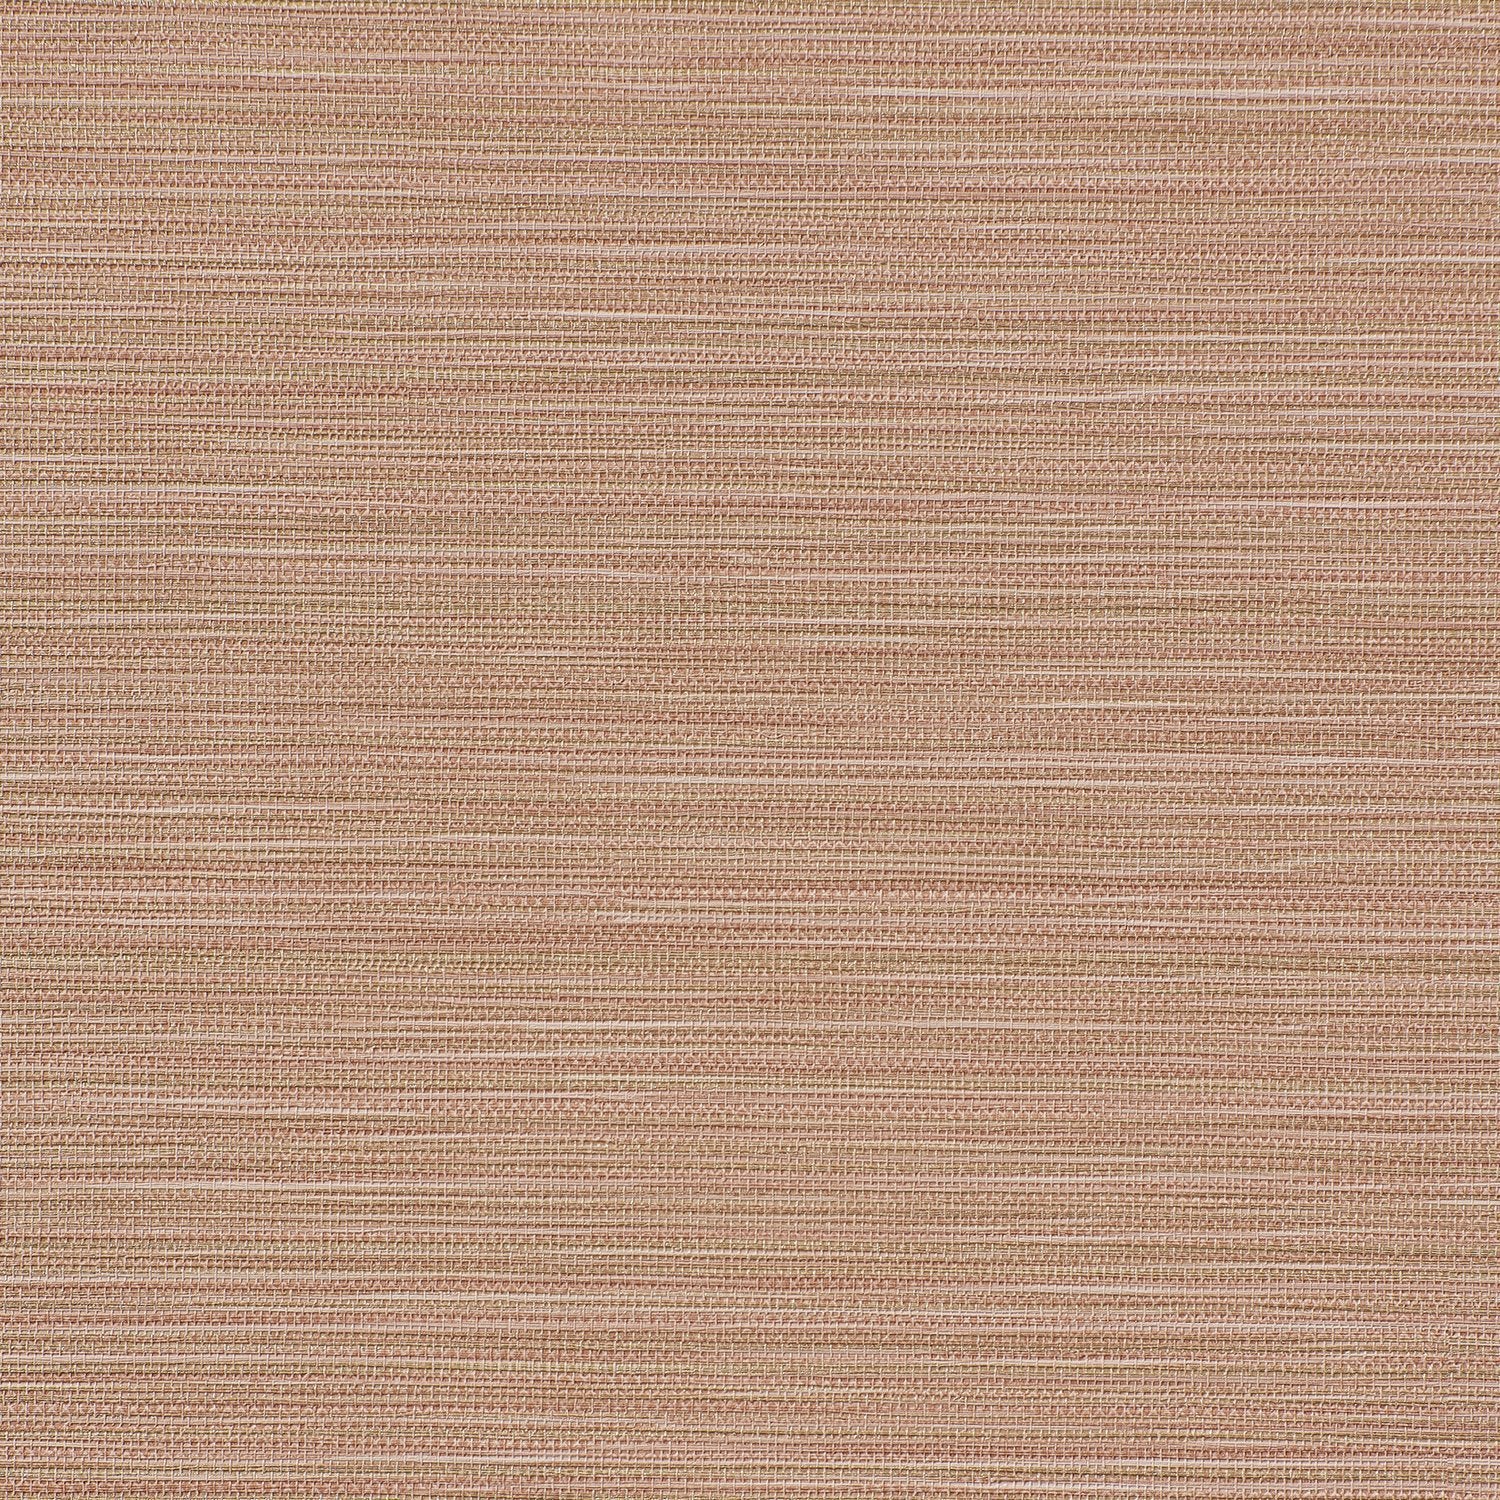 In Stitches - Y47817 - Wallcovering - Vycon - Kube Contract